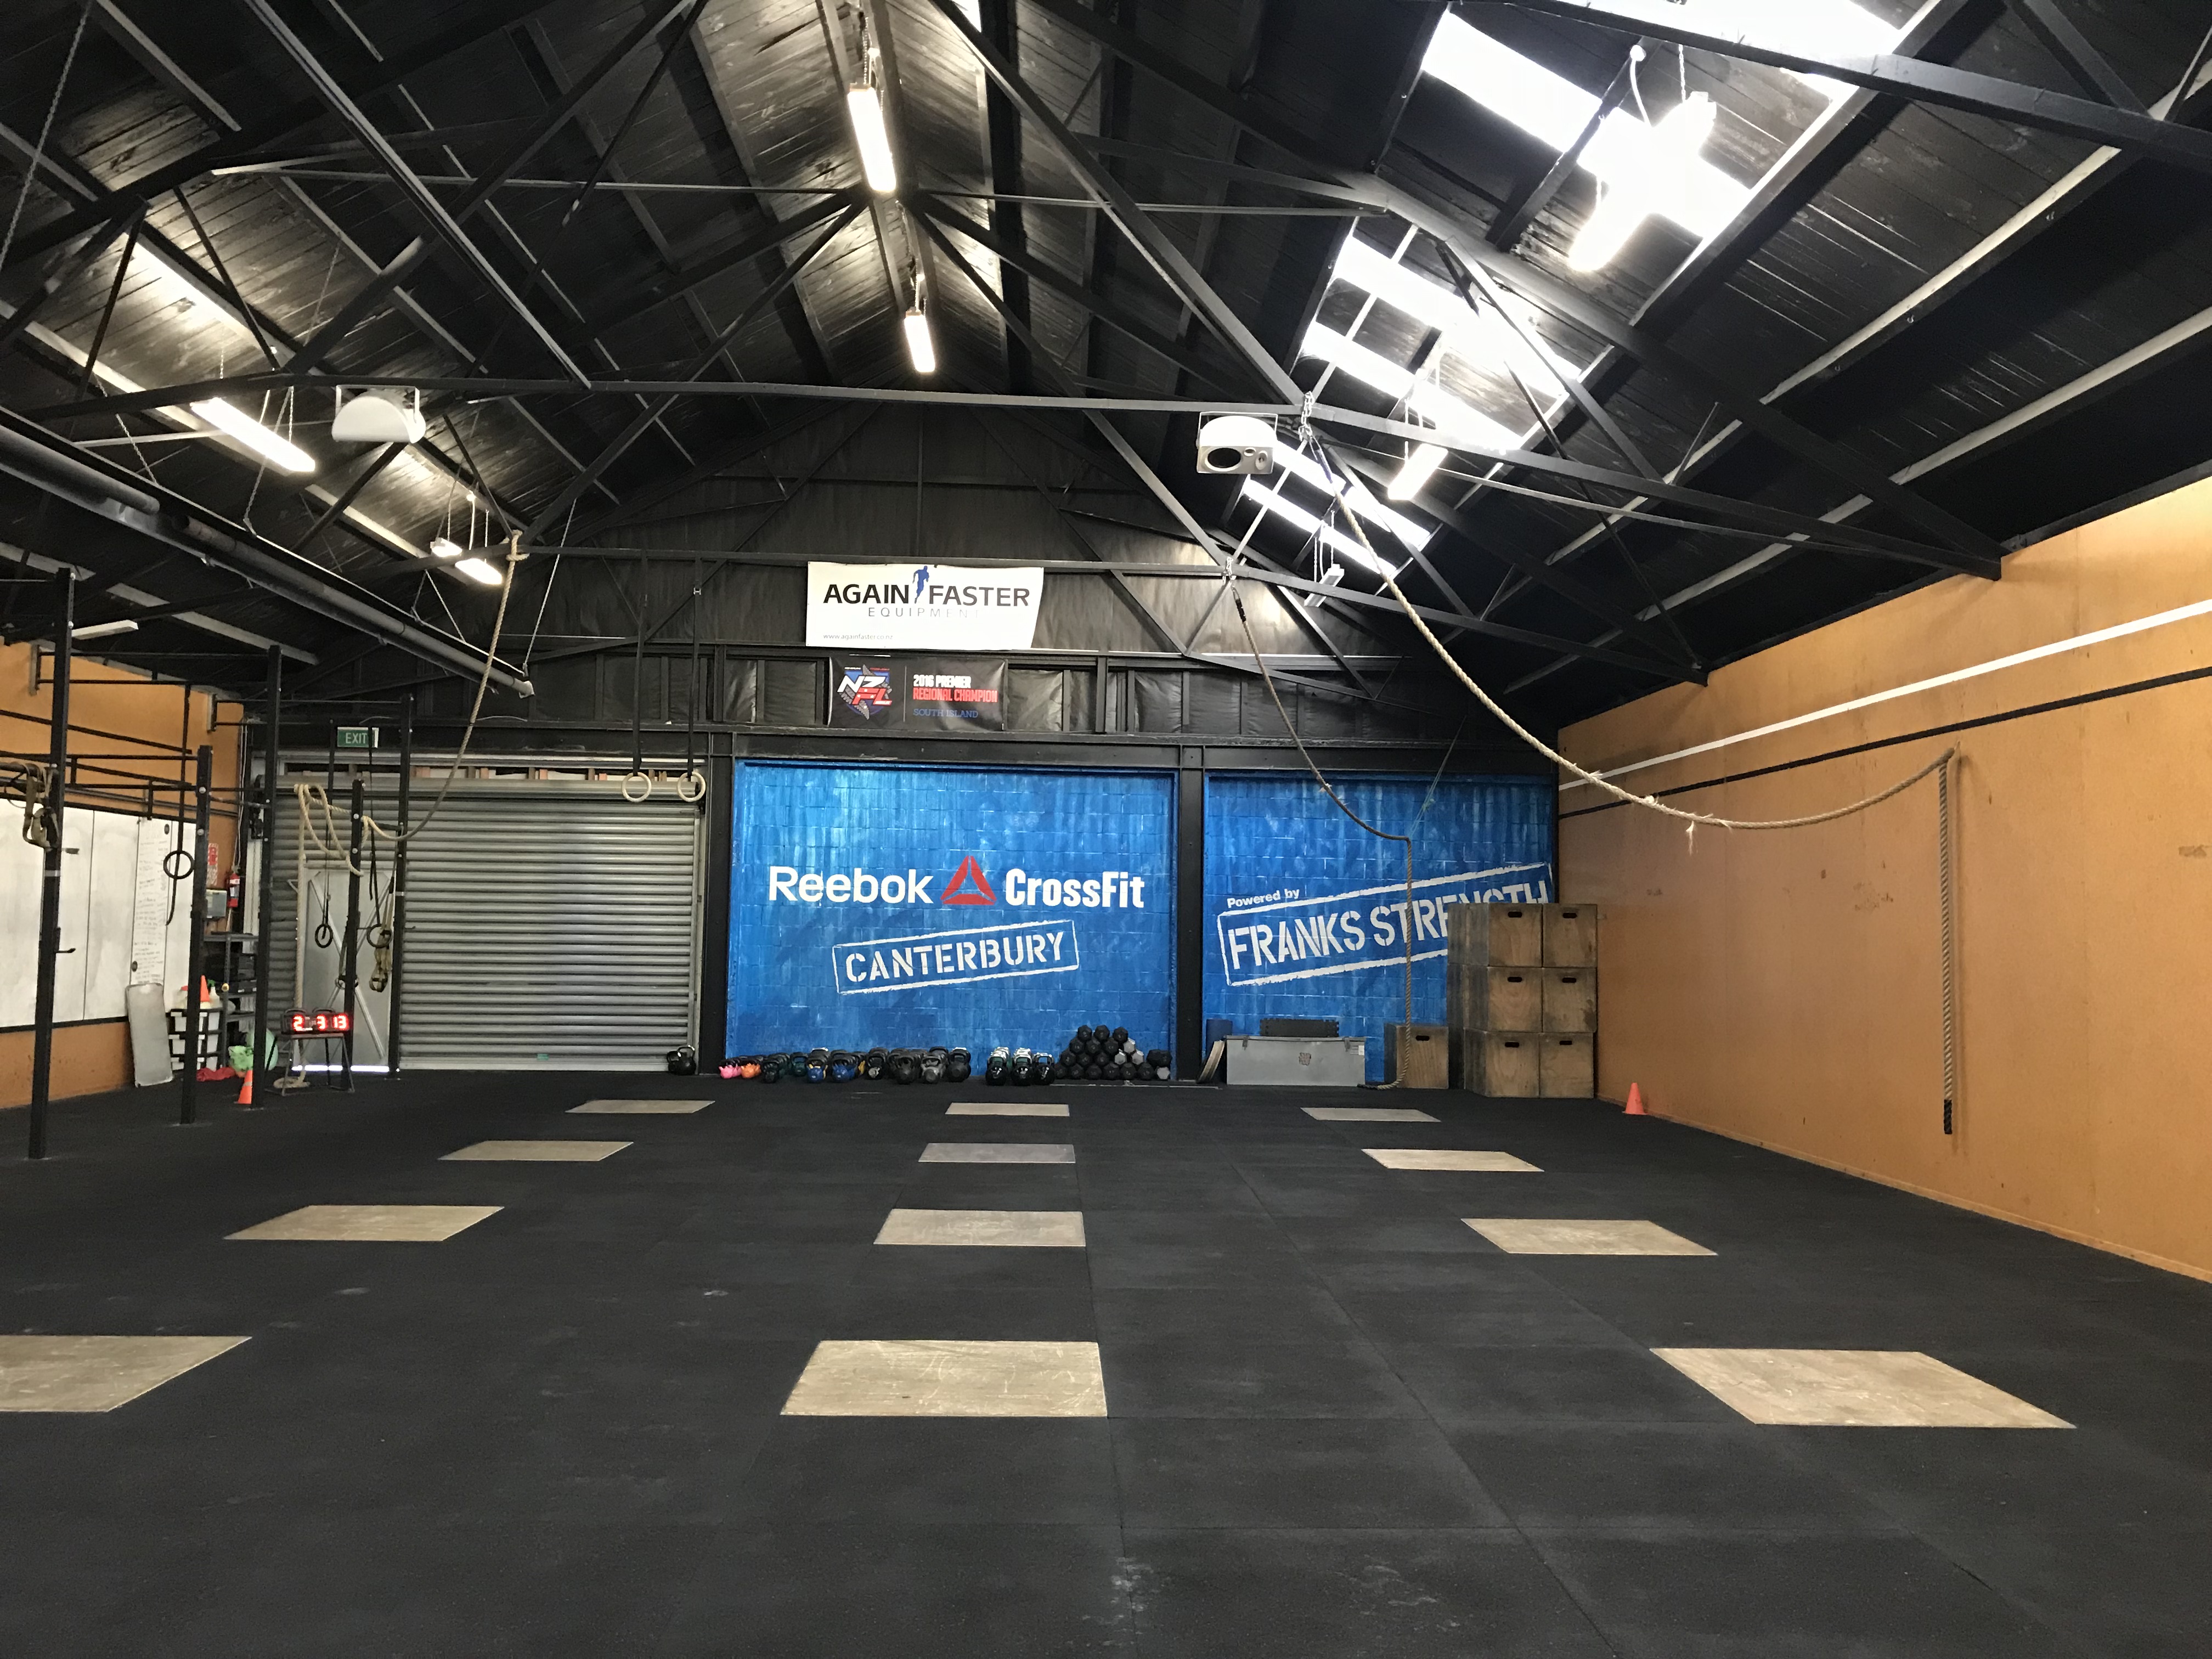 Rugby and crossfit: Franks Brothers at Reebok Crossfit Canterbury, Christchurch - WOD